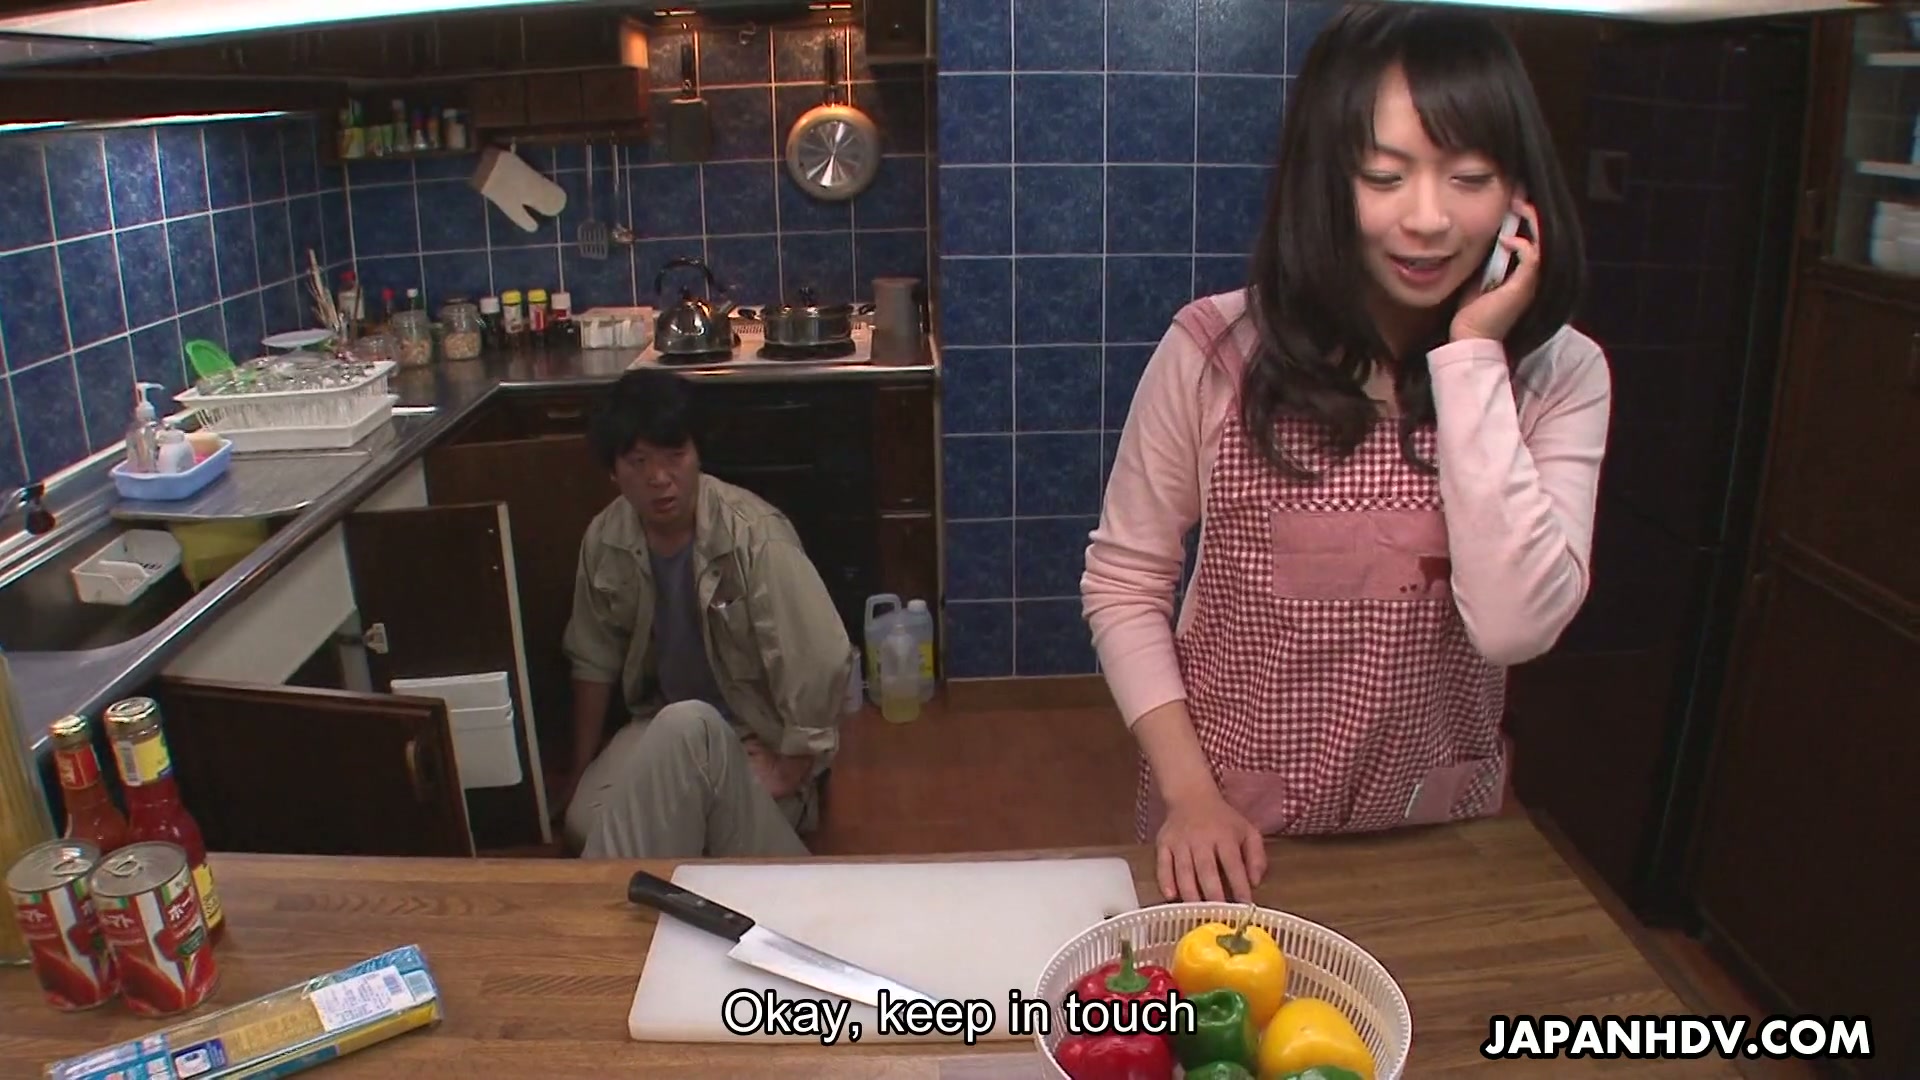 A plumber feeds a lonely Japanese housewife Nozomi Hazuki with his dick pic picture